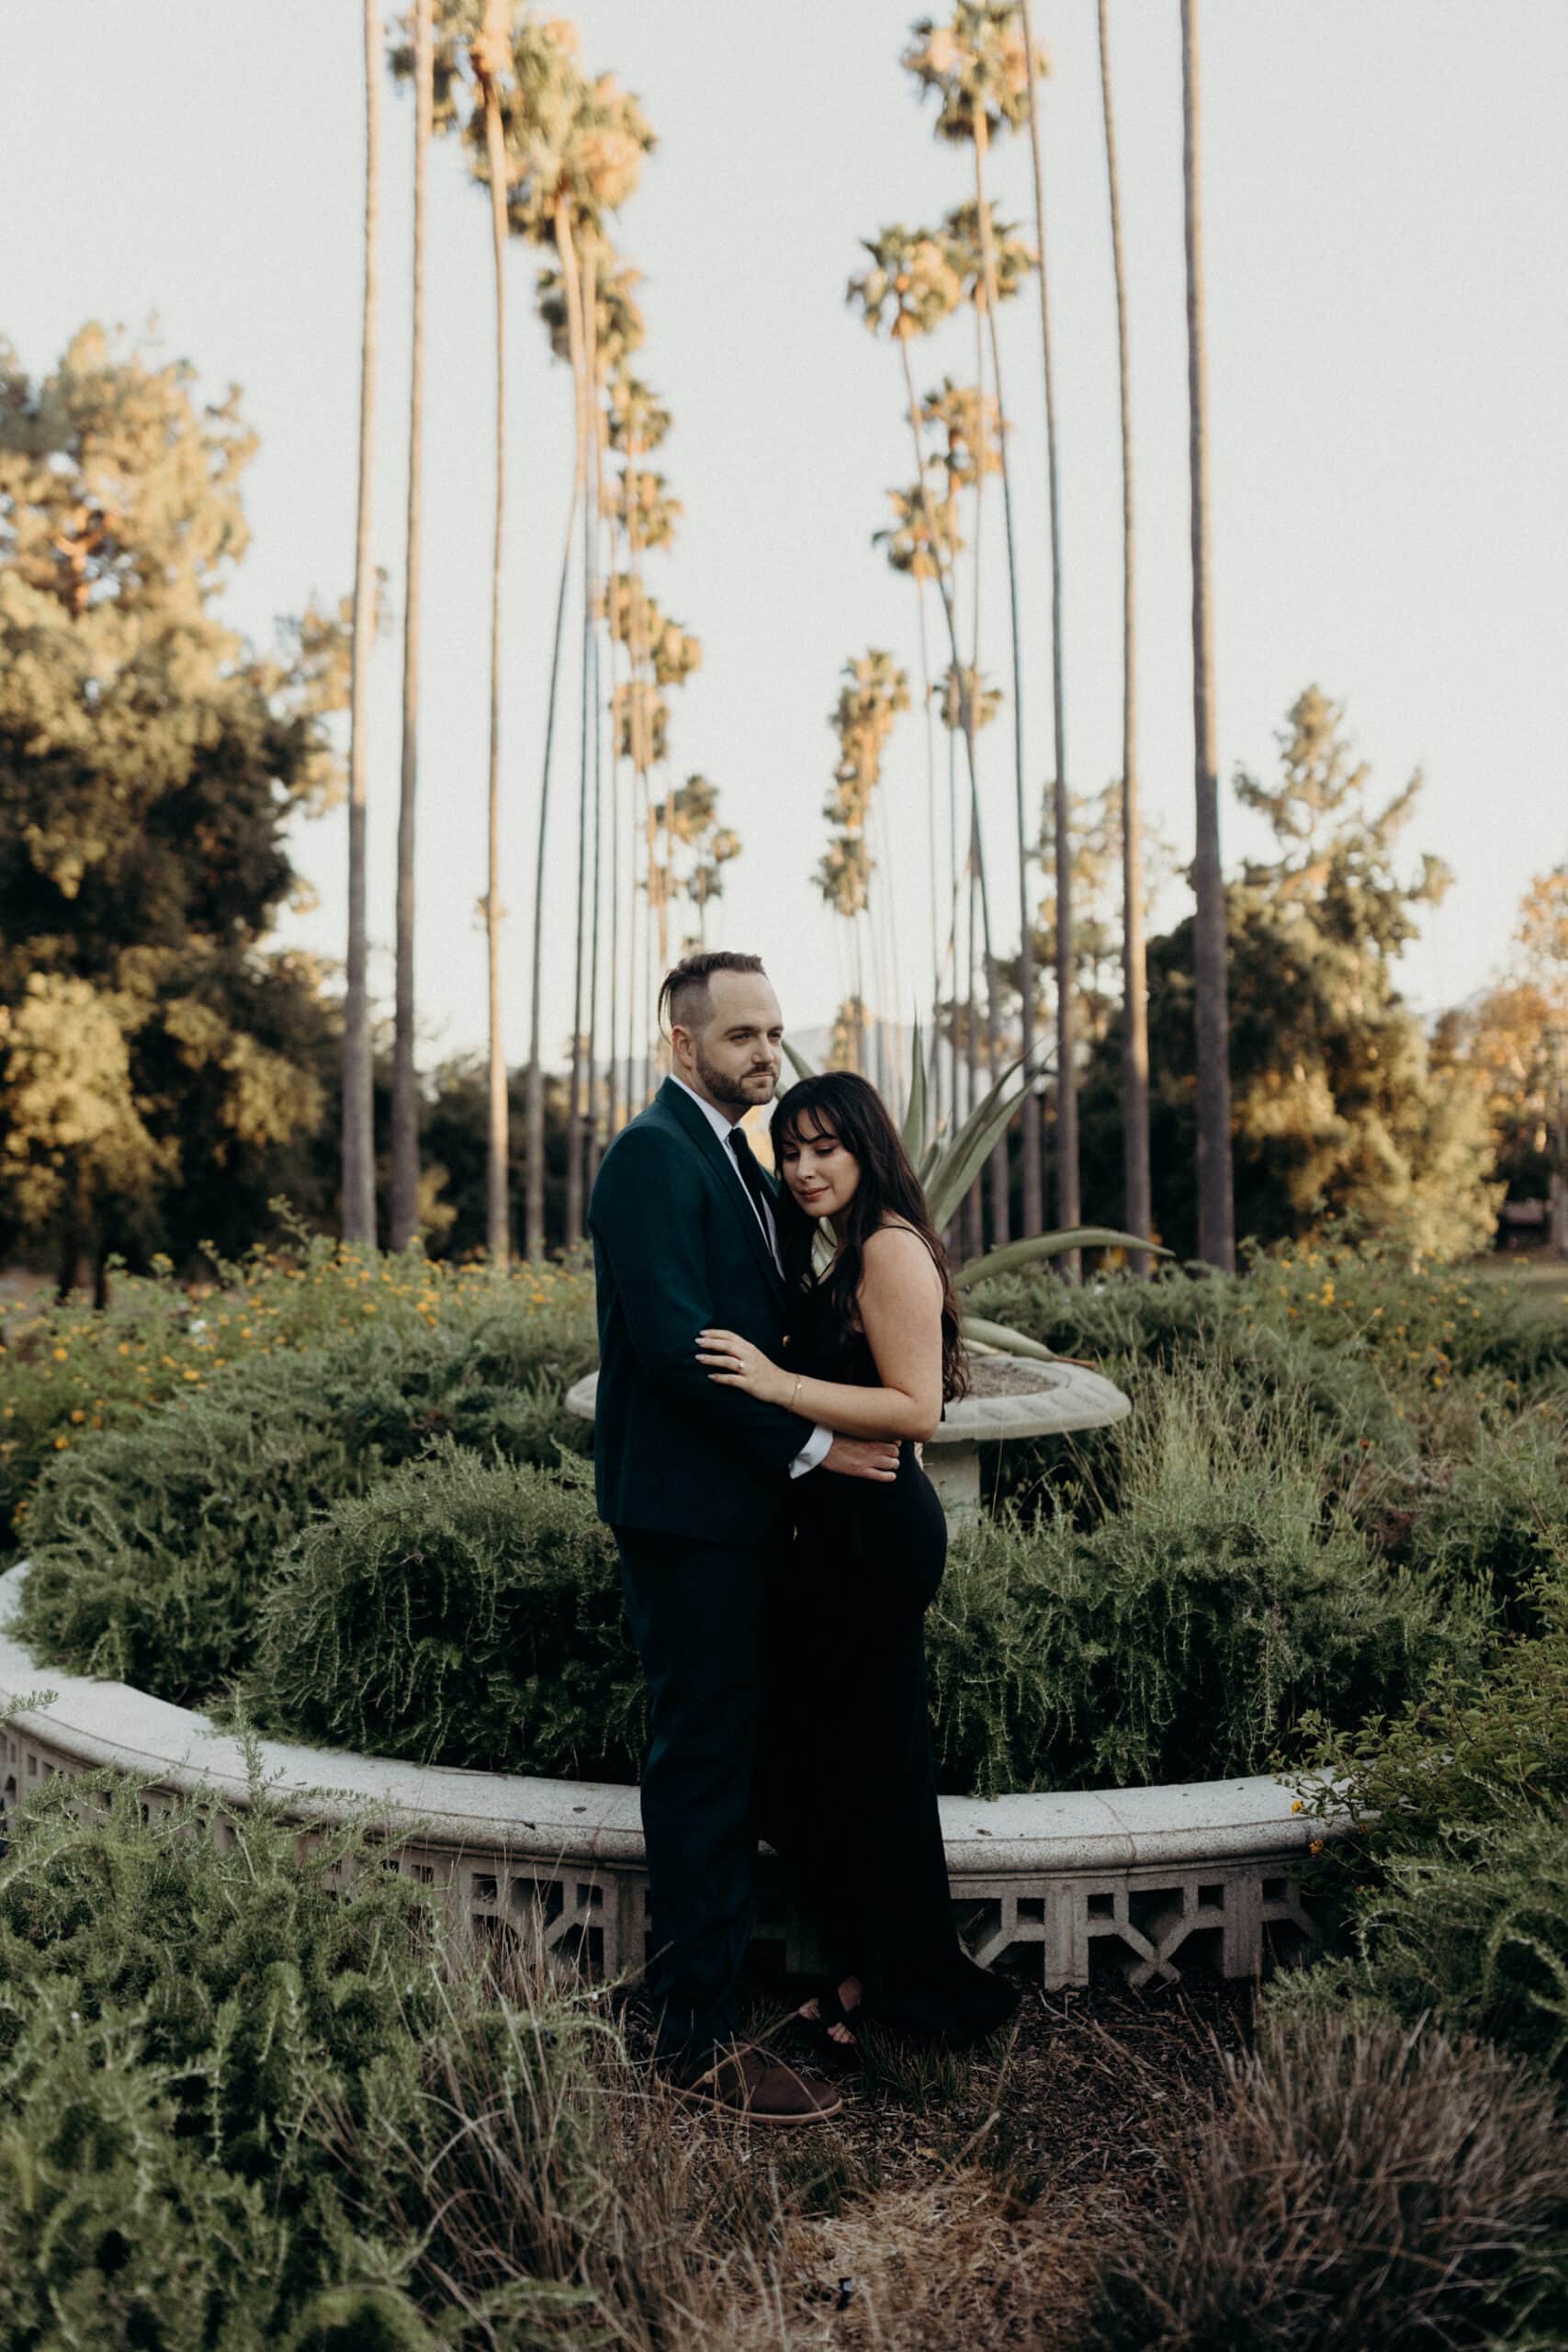 los angeles park engagement session with pal trees